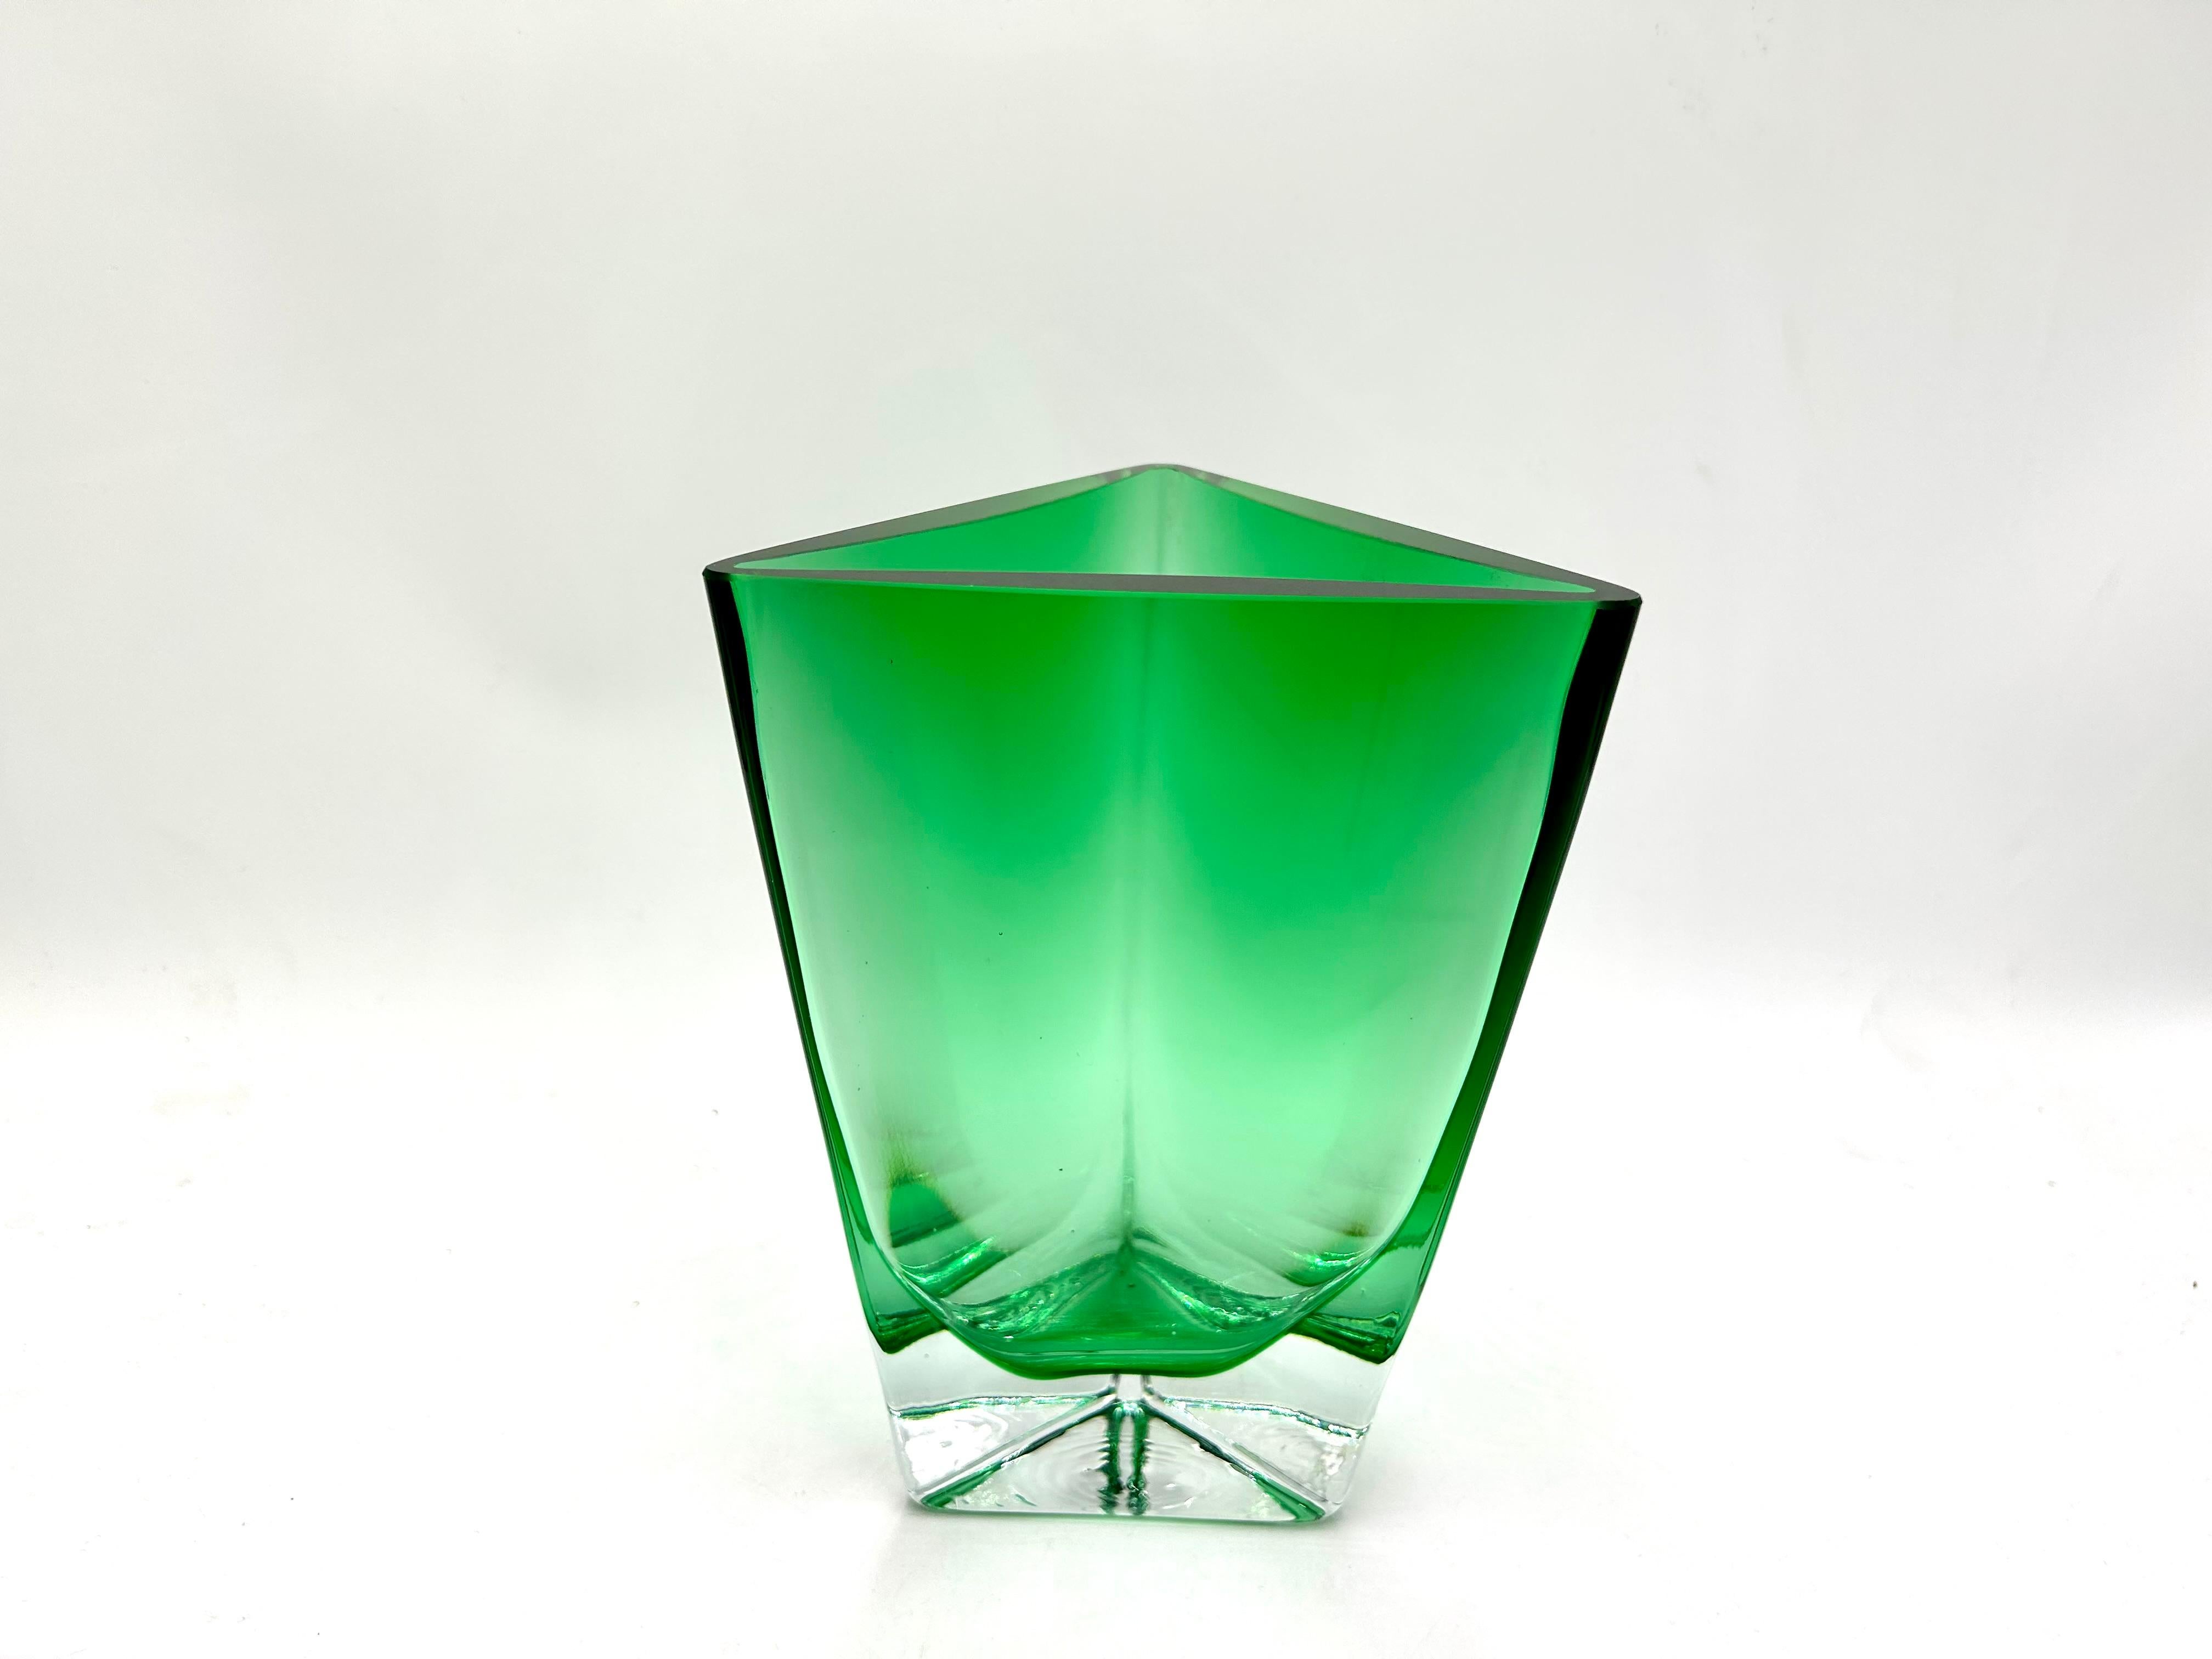 Beautiful emerald vase with a triangular shape.

Solid thick green glass on a transparent base.

Produced by Huta Szkla Krosno in the 1990s

Measures: height: 21.5

width: 15cm.